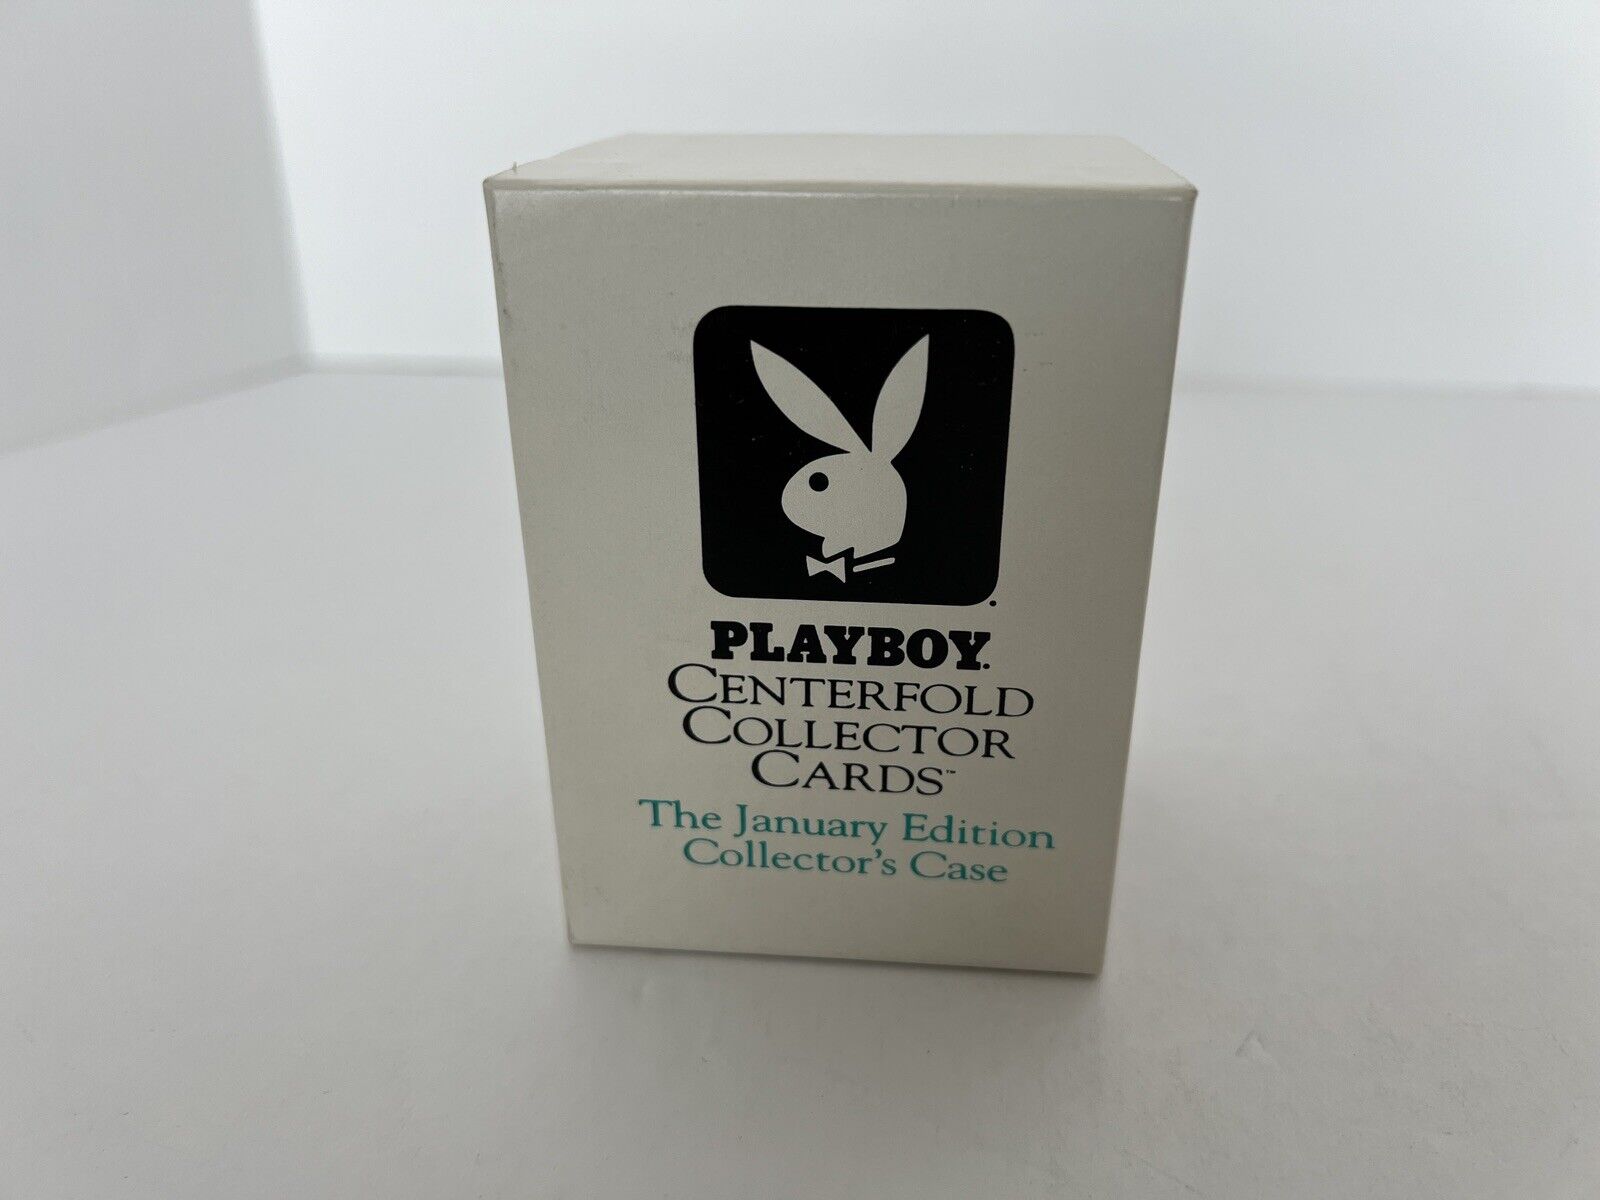 Playboy Centerfold Collector Cards 1993 January Edition